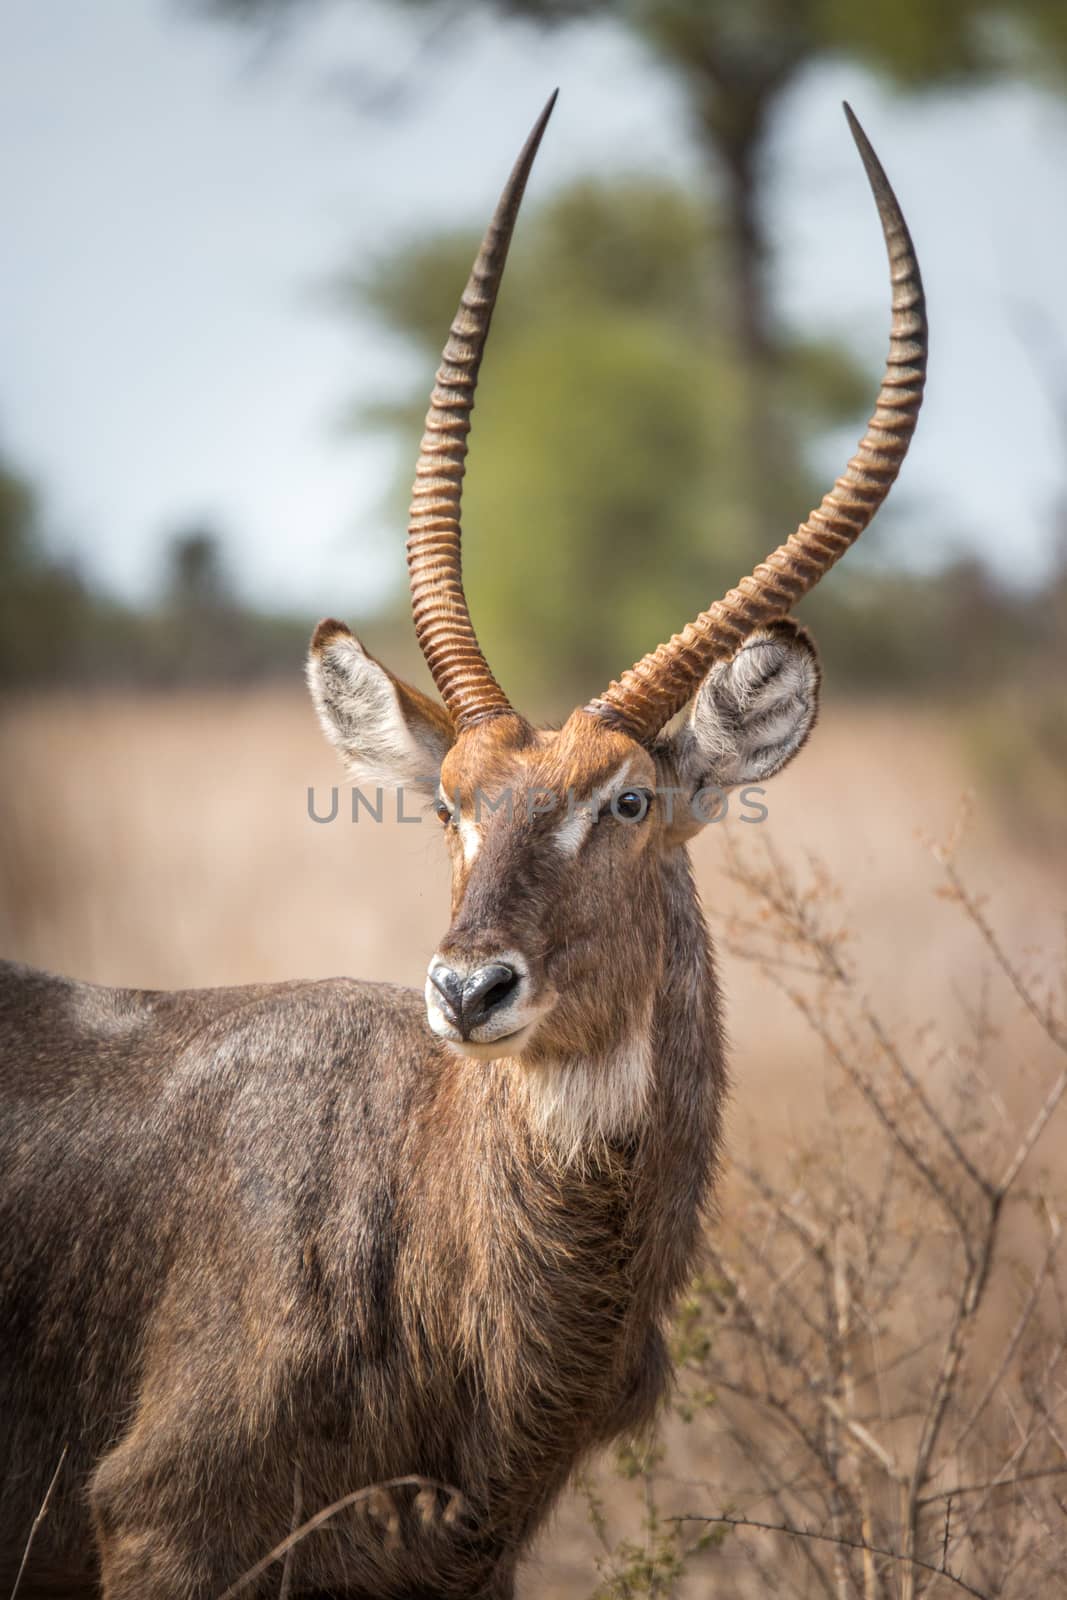 Waterbuck starring at the camera. by Simoneemanphotography